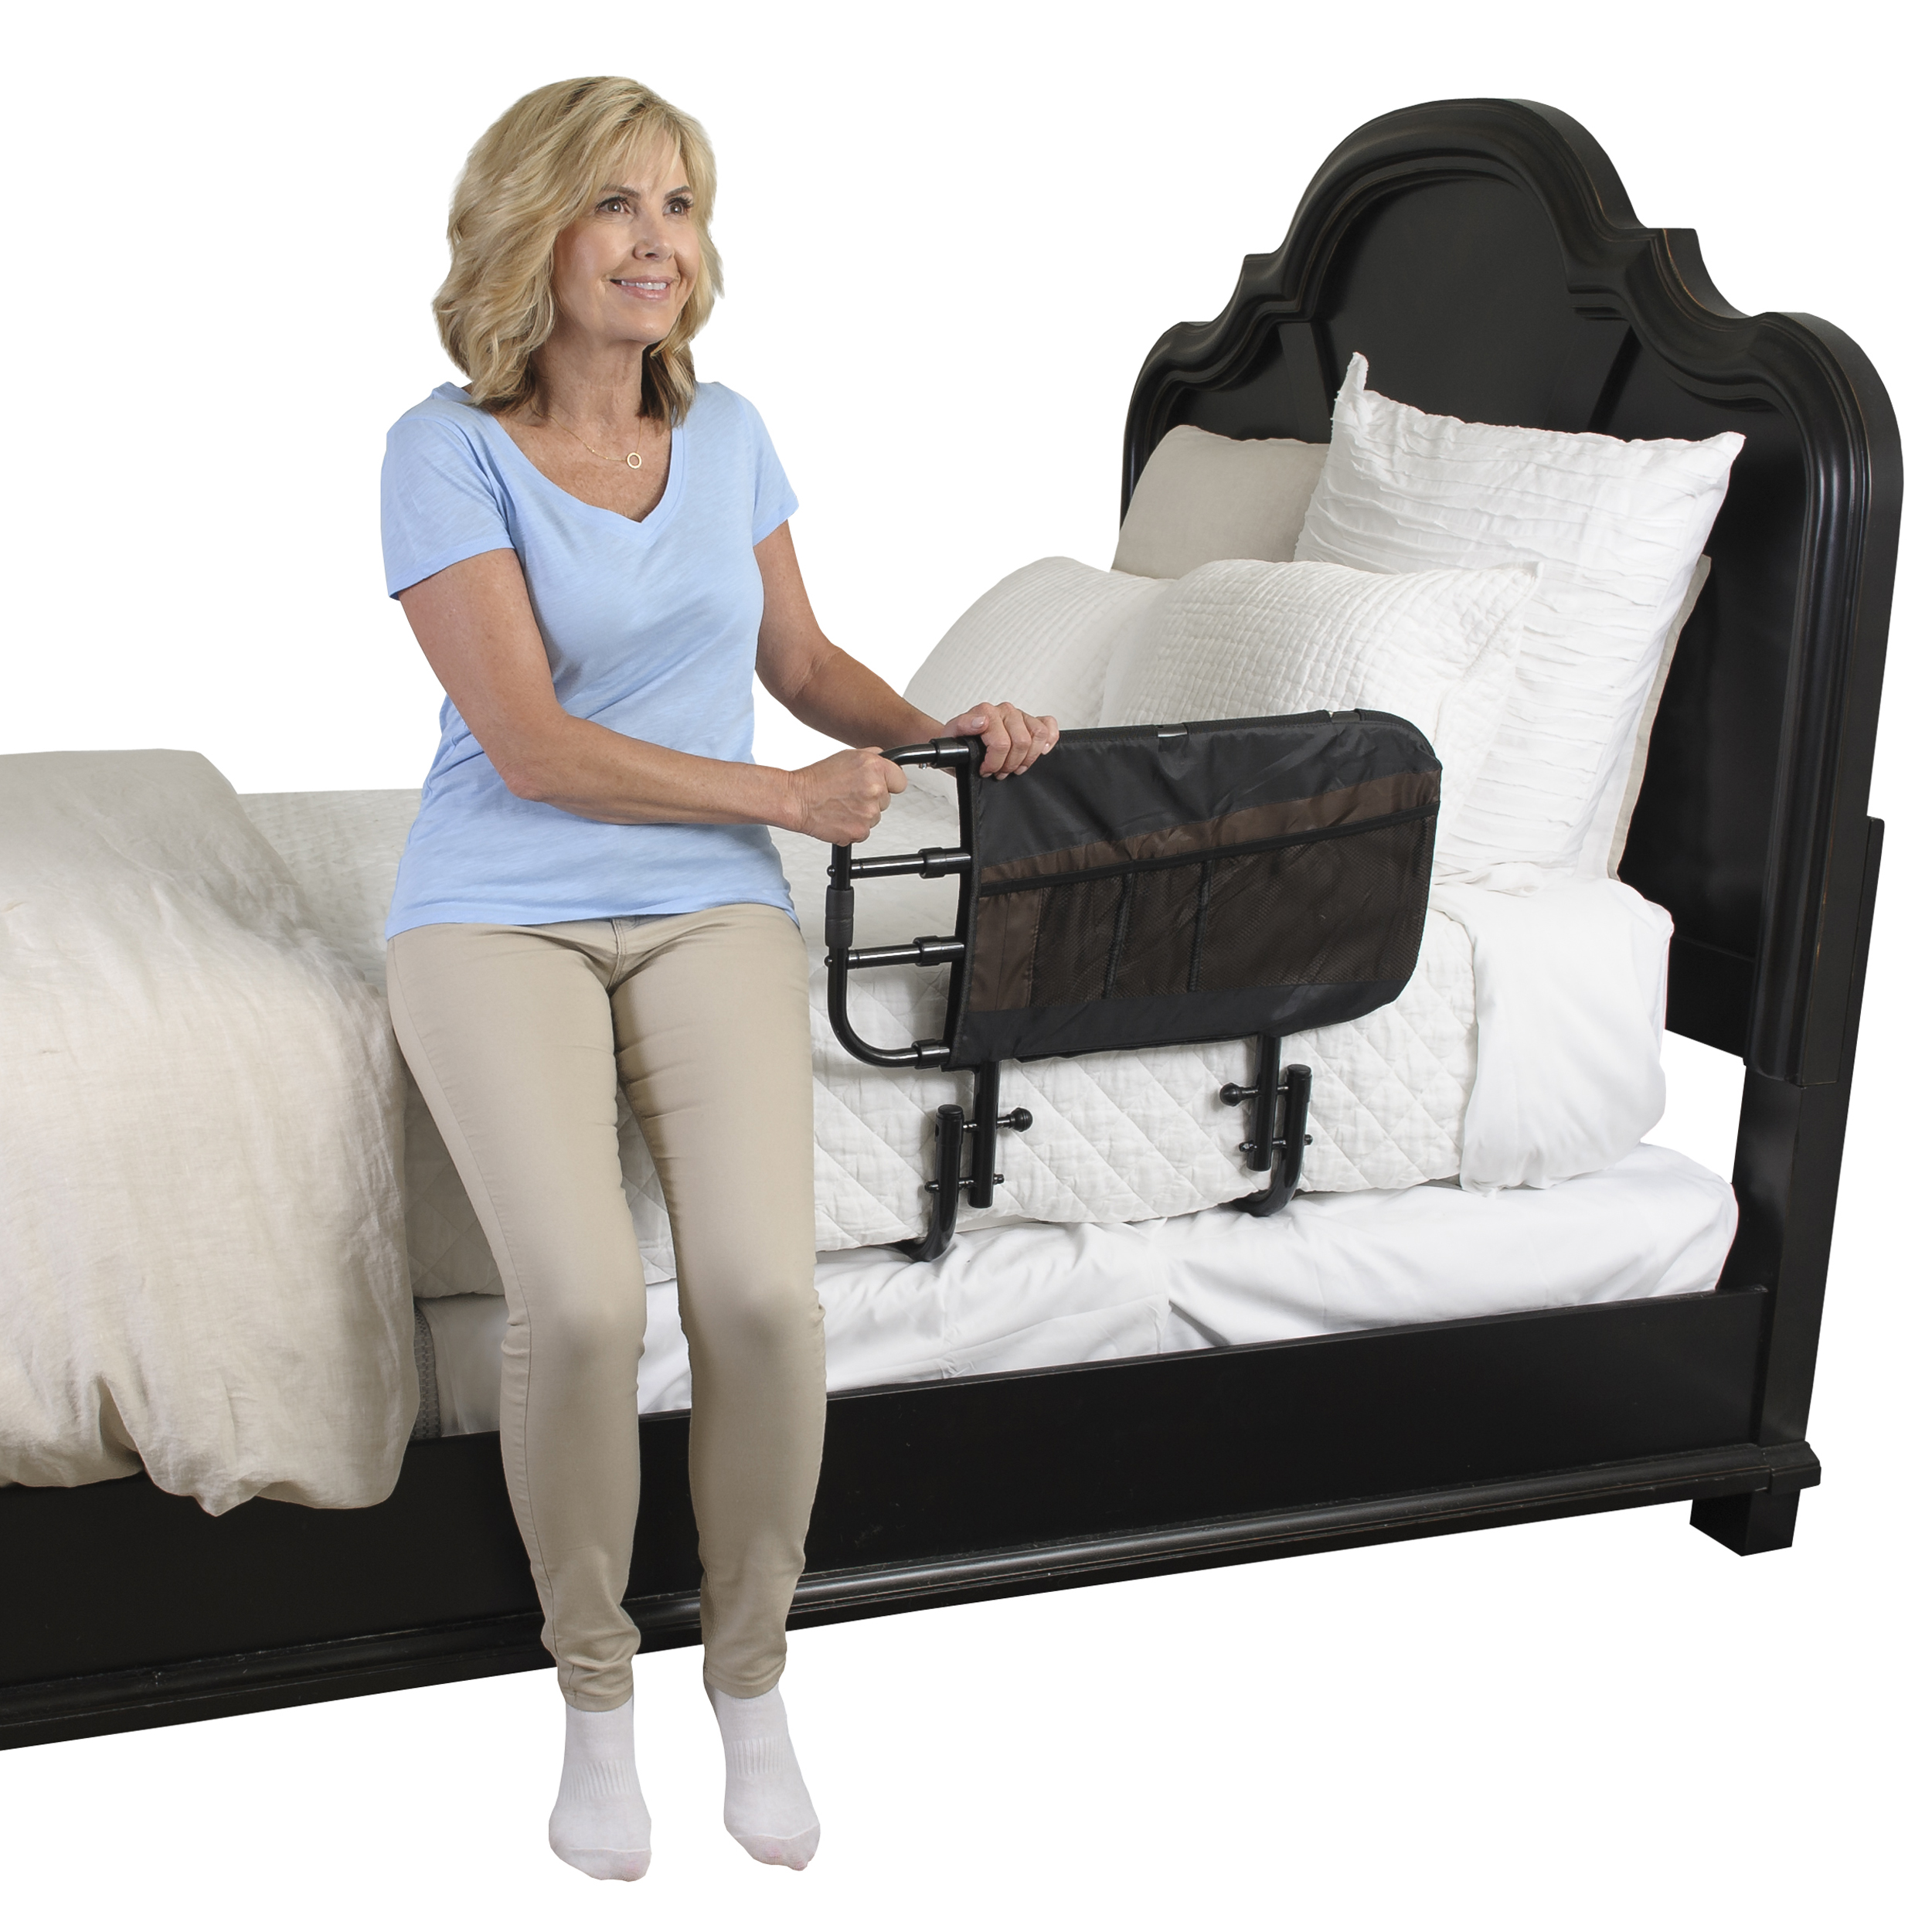 Product Image 8000 Bed Rail EZ Adjust - woman sitting on bed